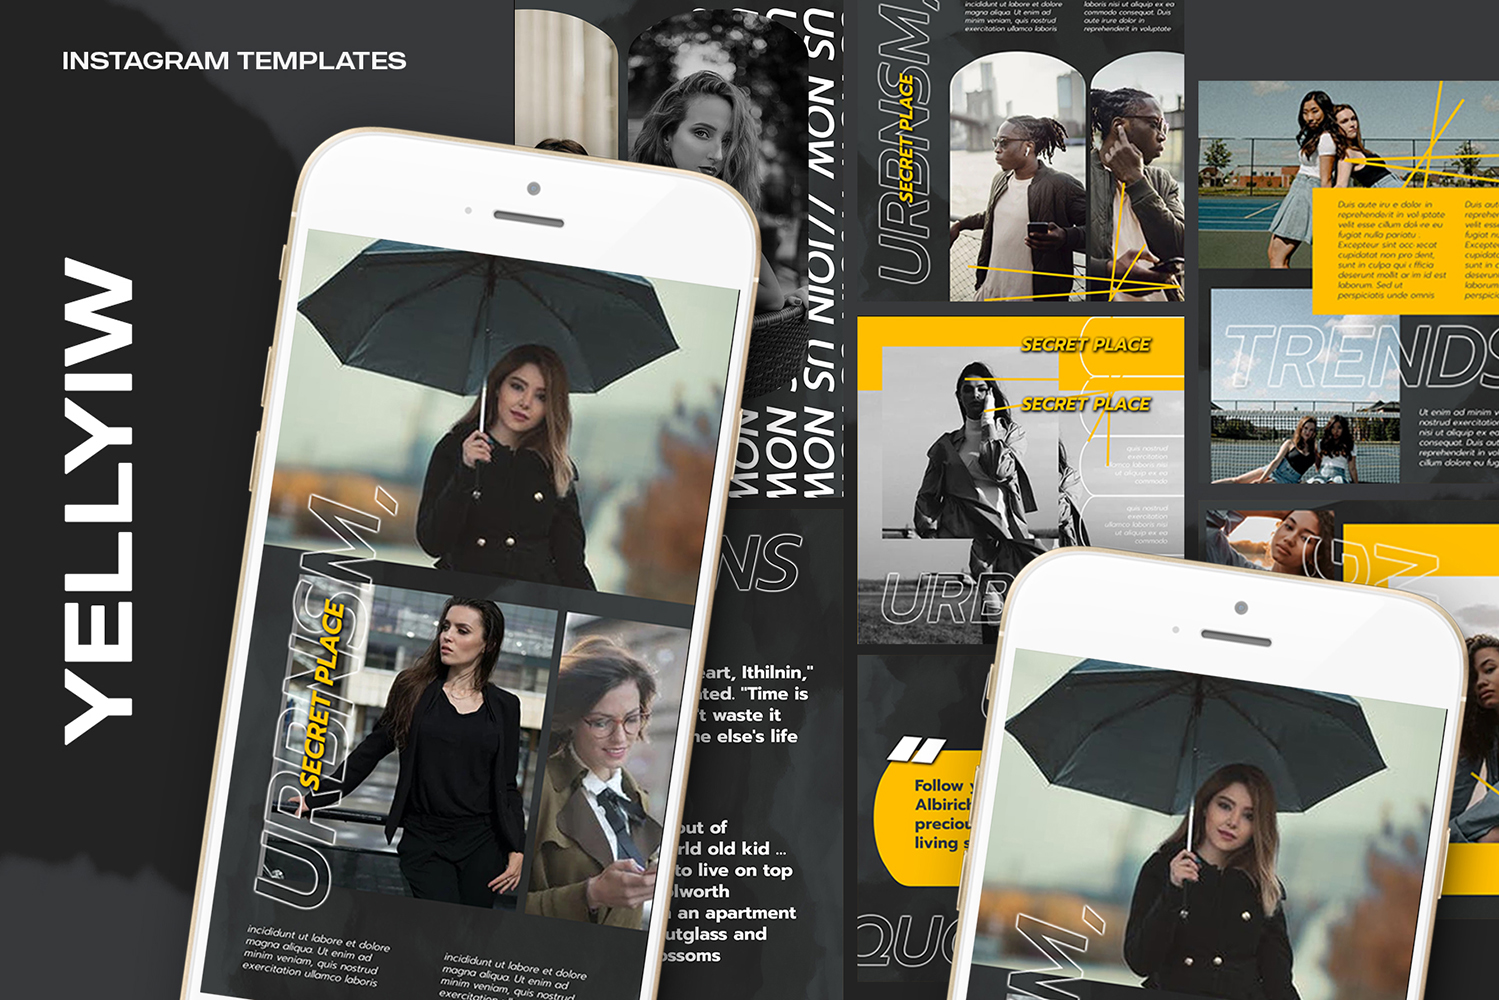 Yellyiw Instagram Templates for Social Media